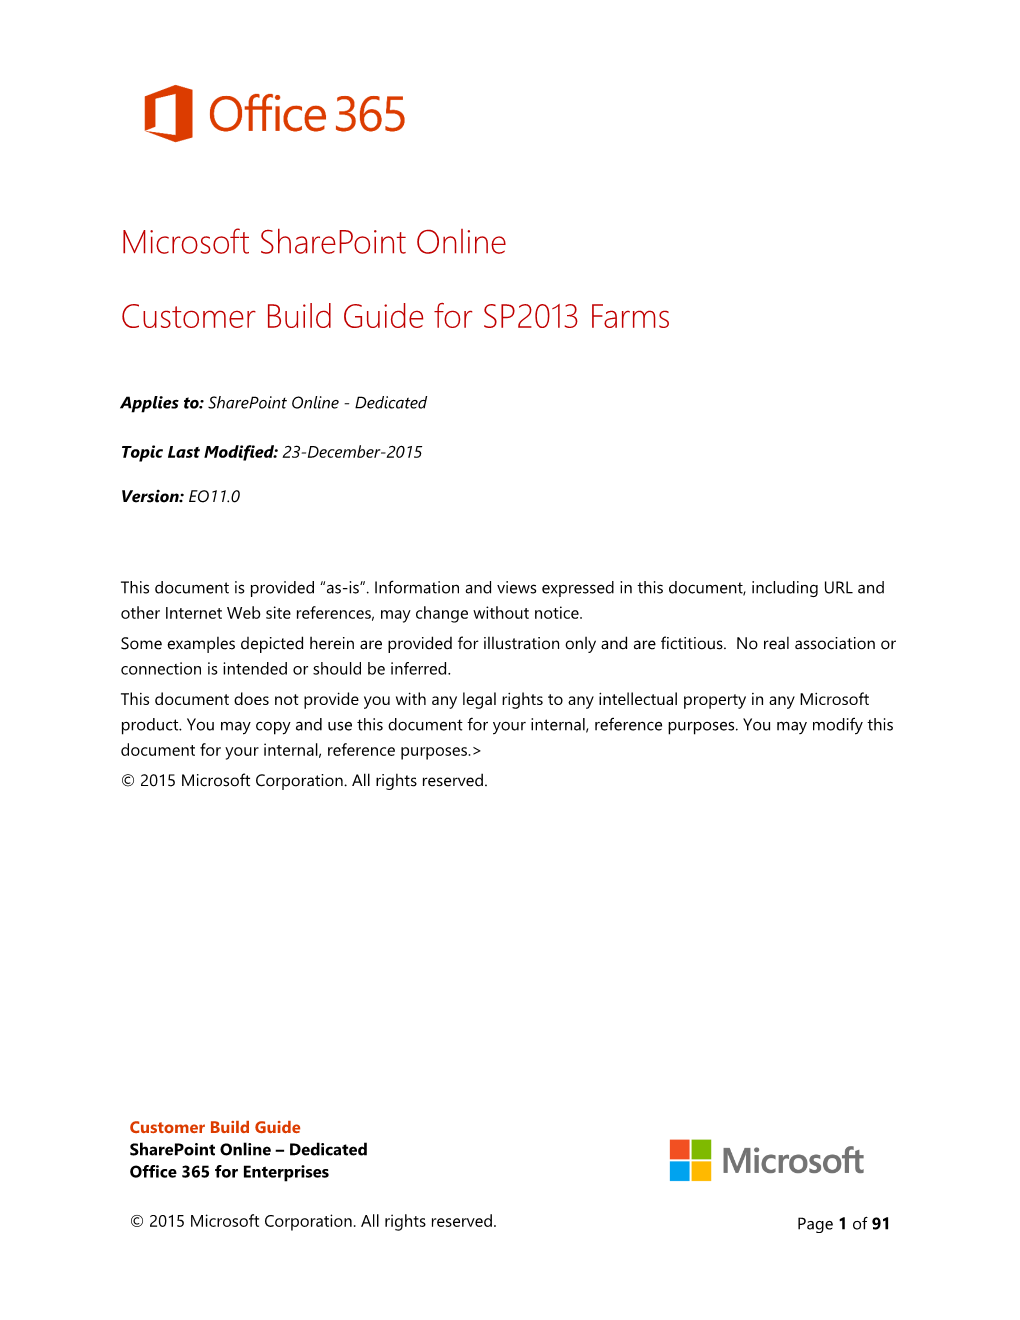 Microsoft Sharepoint Online Customer Build Guide for SP2013 Farms